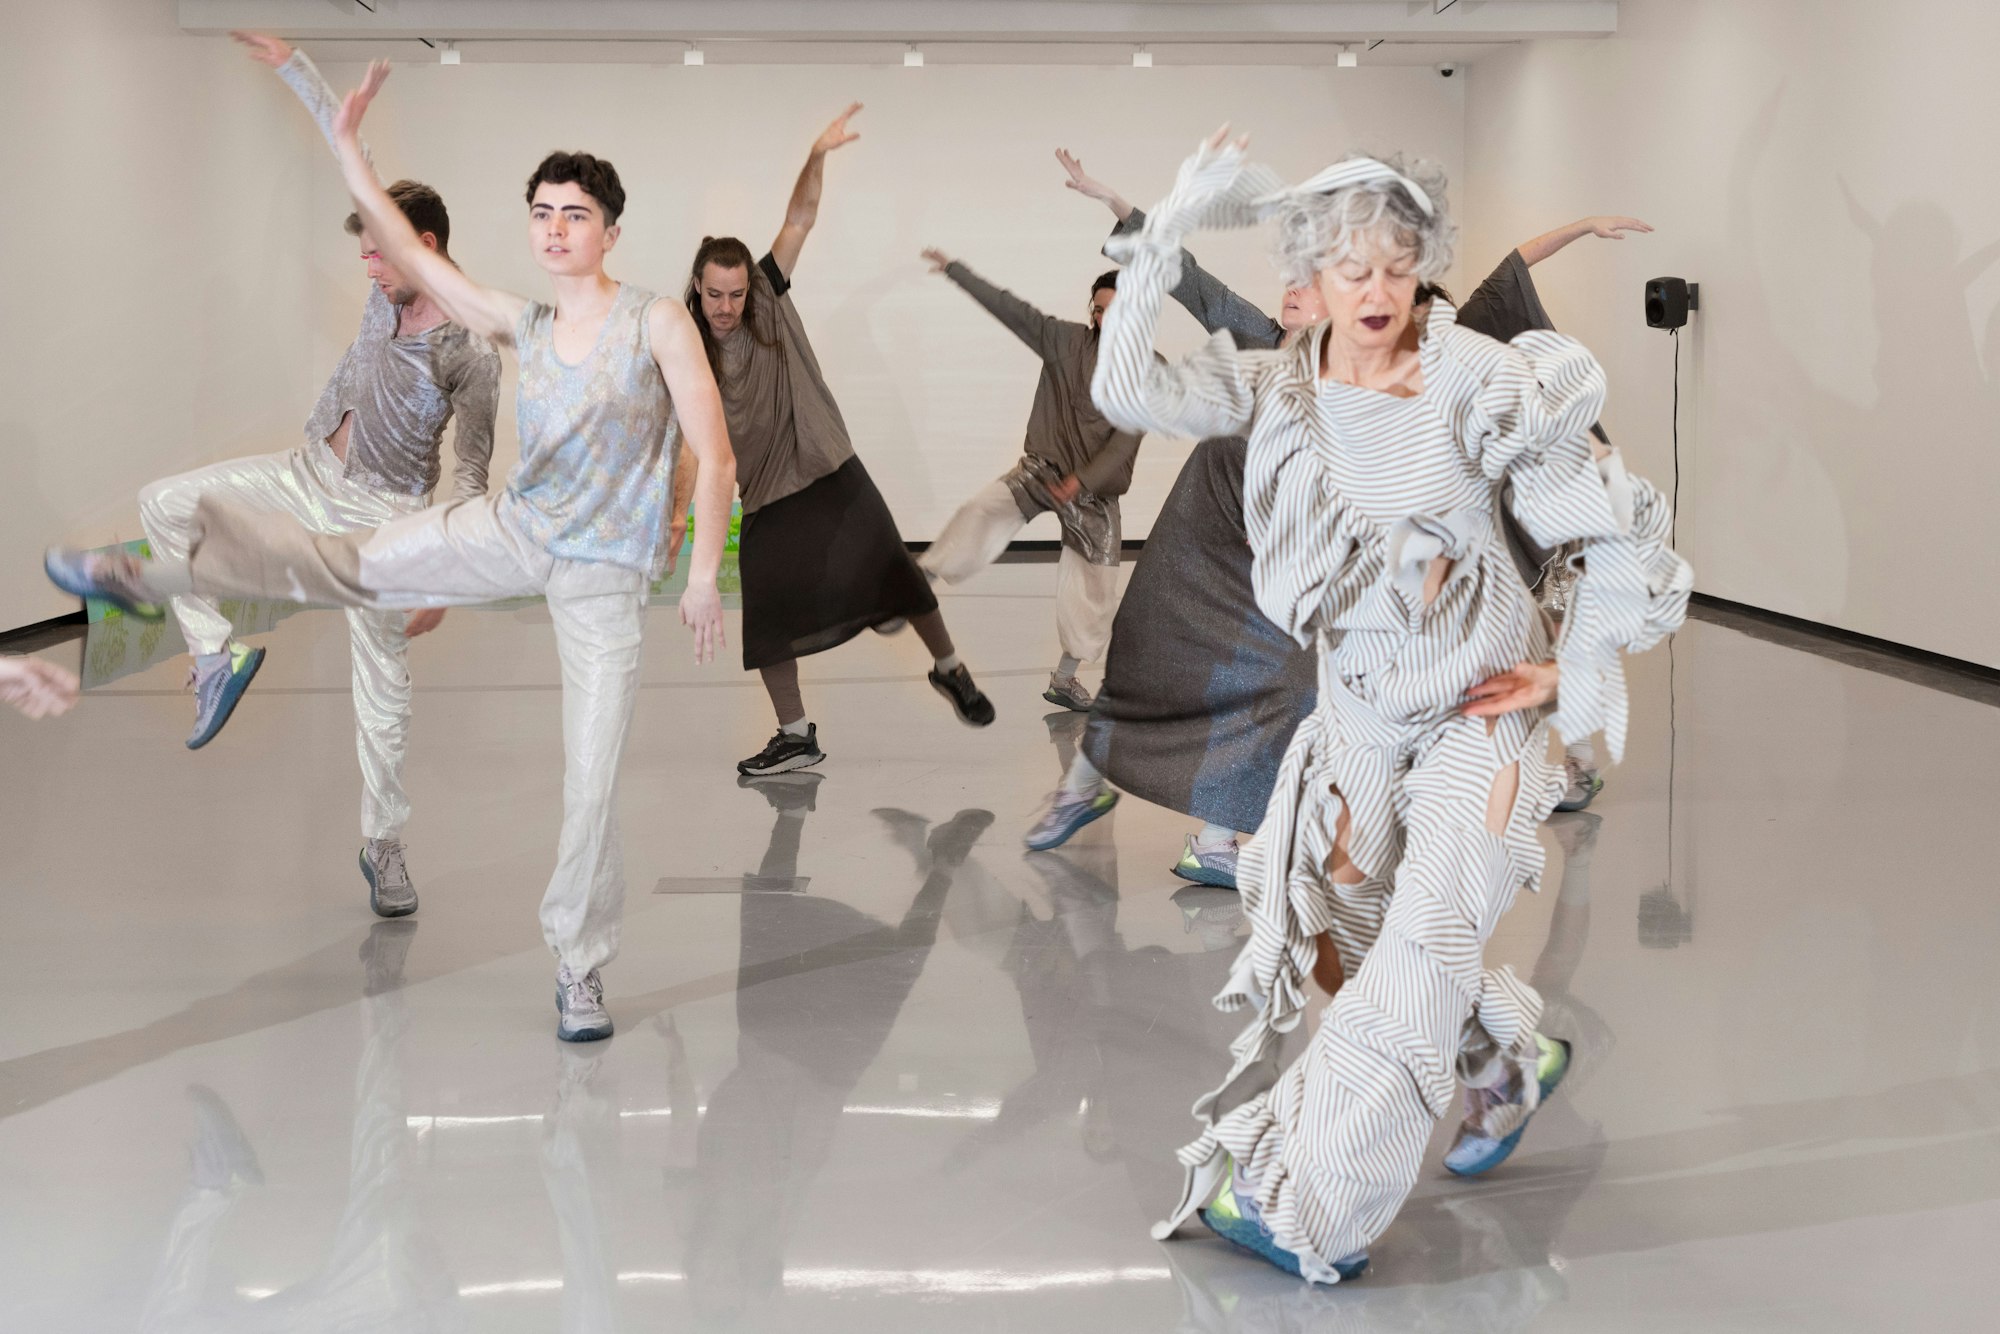 A group of 6 people dancing in a large white room. All of them are dressed in silver or grey costumes.